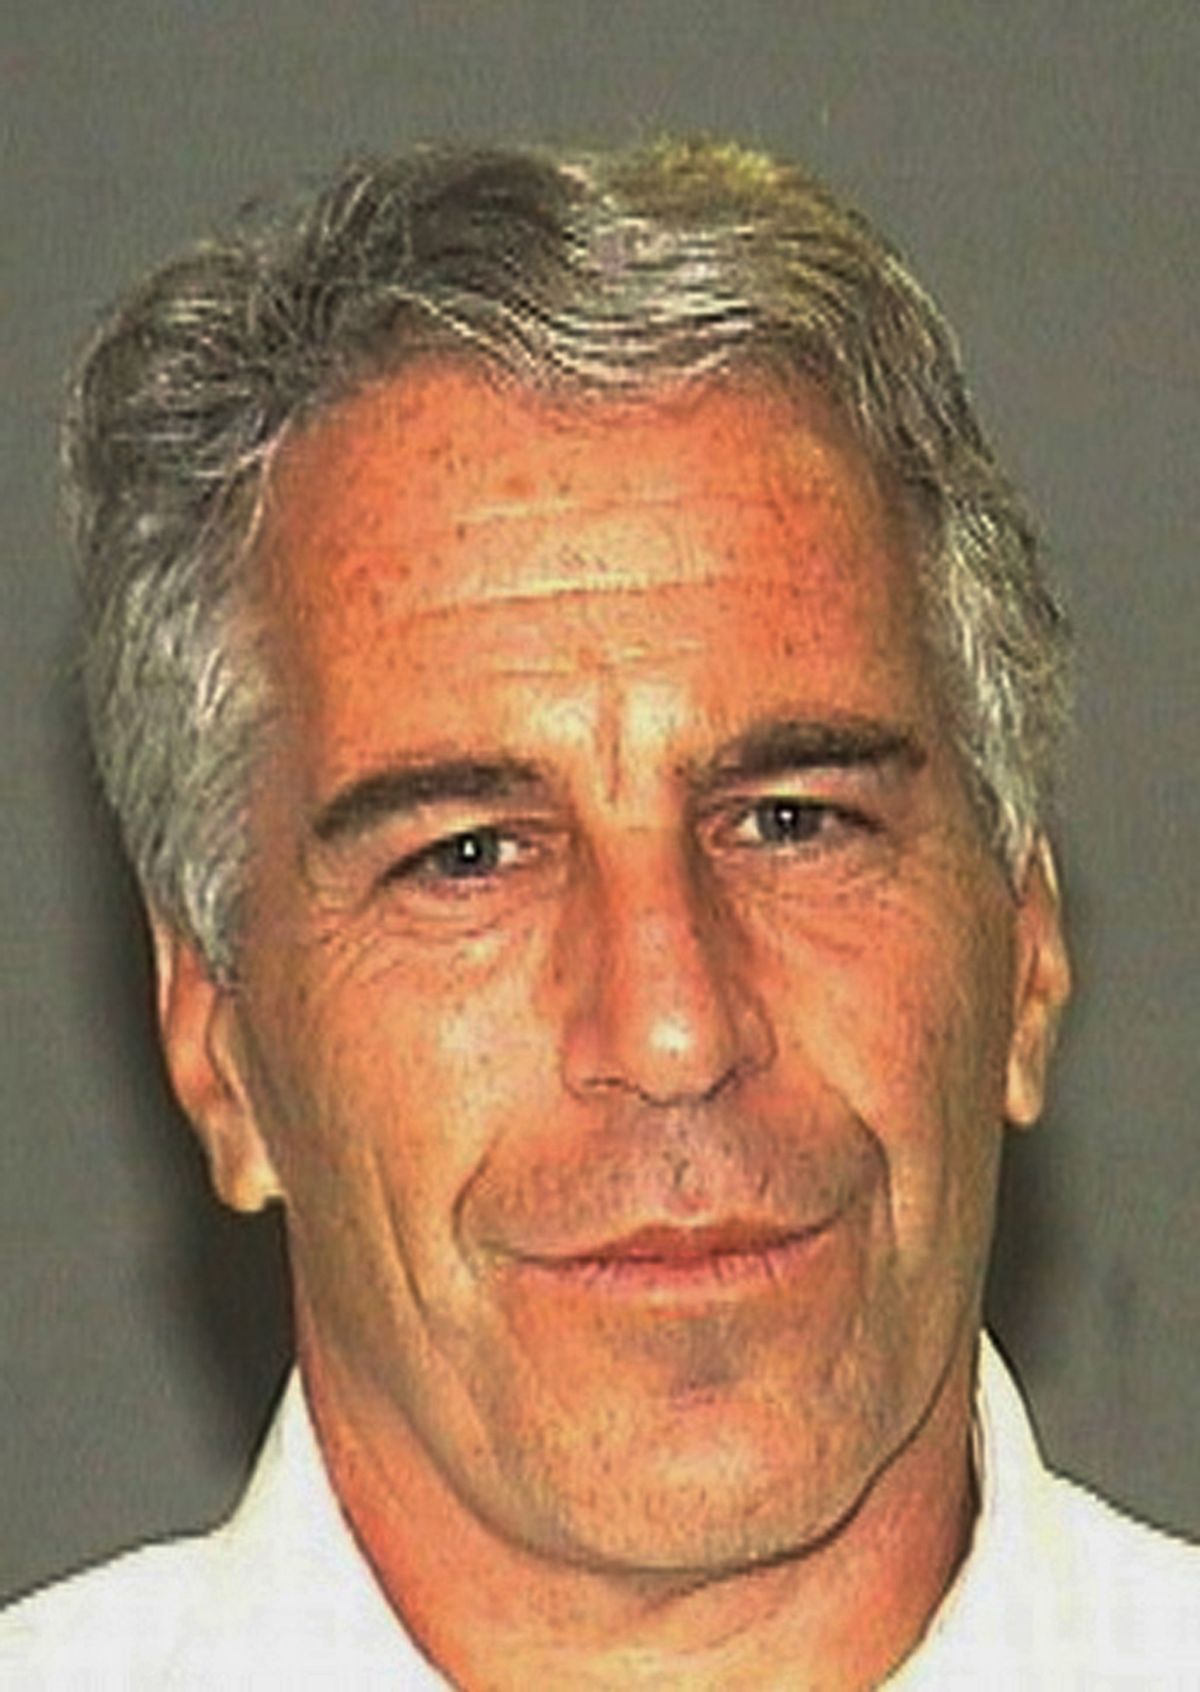 This July 27, 2006 arrest photo made available by the Palm Beach Sheriff's Office, in Florida, shows Jeffrey Epstein. Epstein was suspected nearly a decade ago of paying for sex with underage girls. The FBI abruptly dropped its investigation a few years ago, and Epstein pleaded guilty to a single state charge of soliciting prostitution. He served 13 months in jail. Now, two women who say they were sexually abused as girls by Epstein are hoping a trove of new documents will get the case reopened. (AP Photo/Palm Beach Sheriff's Office) (AP)